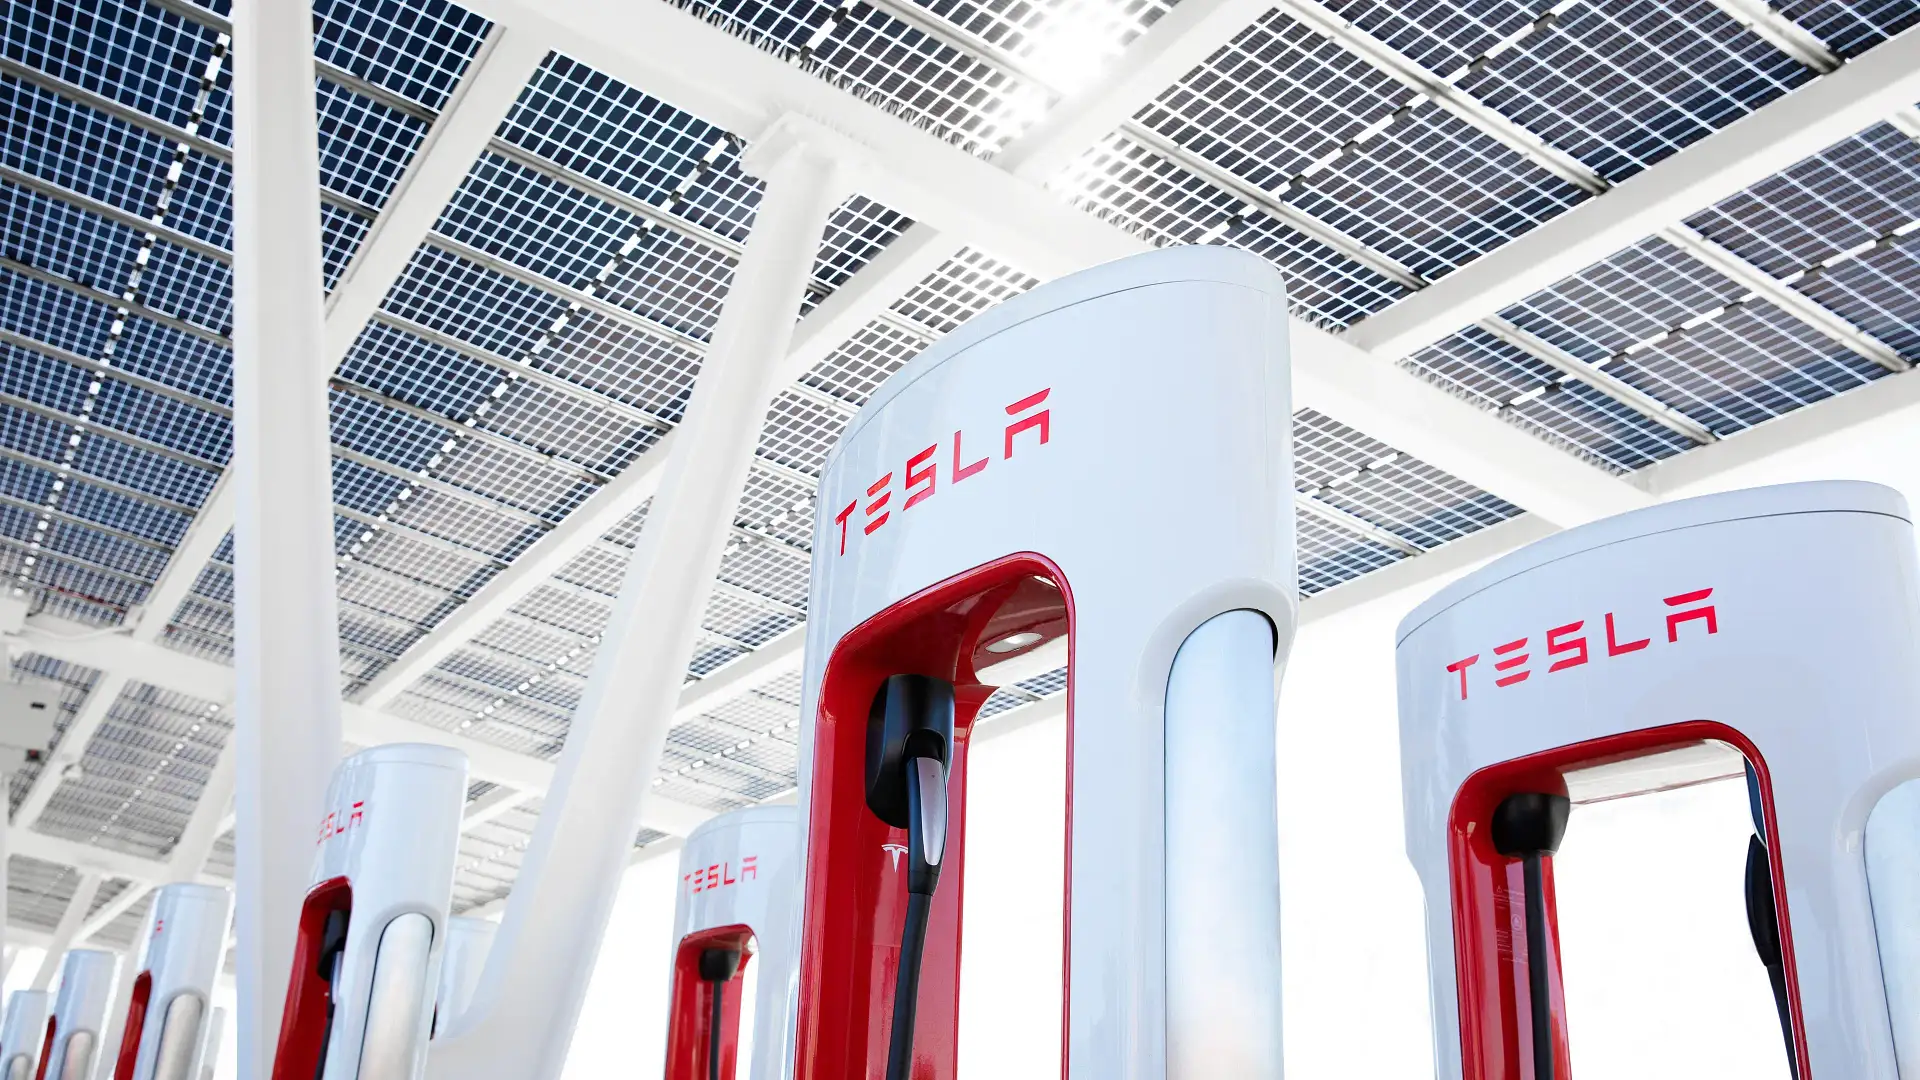 Tesla Supercharger construction to continue in Australia, but long-term expansion in doubt